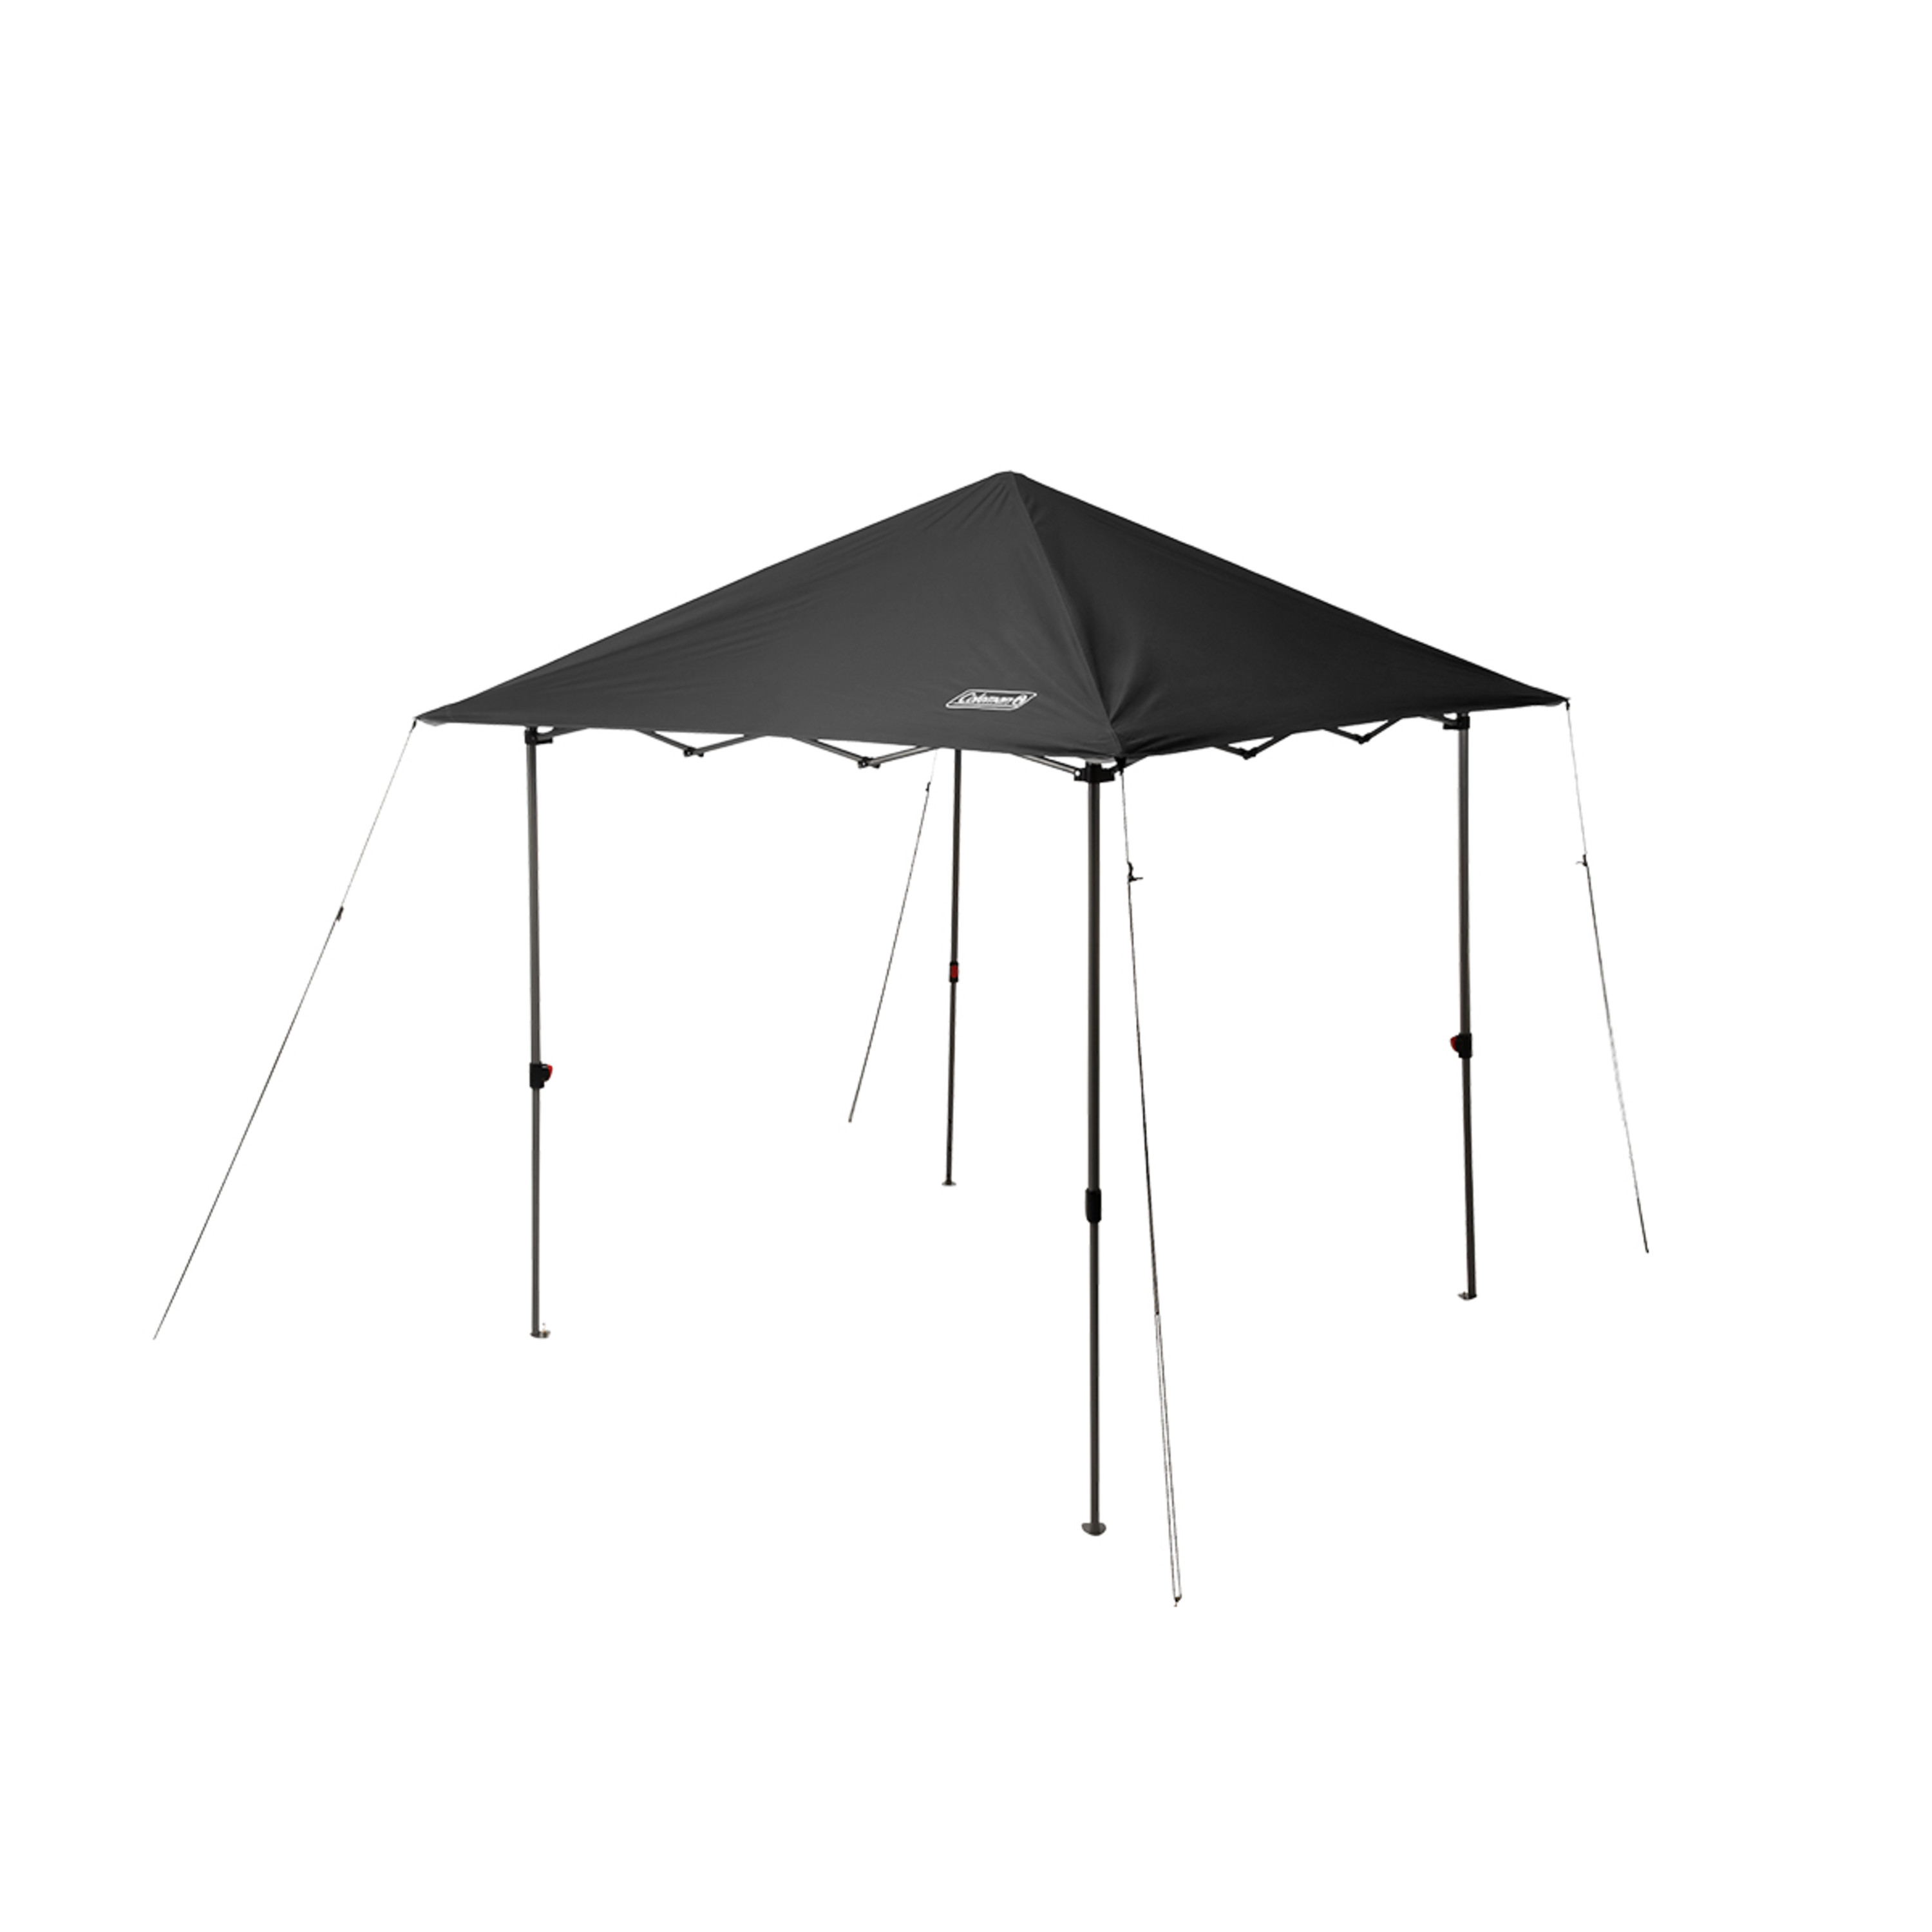 Coleman OASIS Lite 7 x 7 Canopy Tent - image 1 of 6